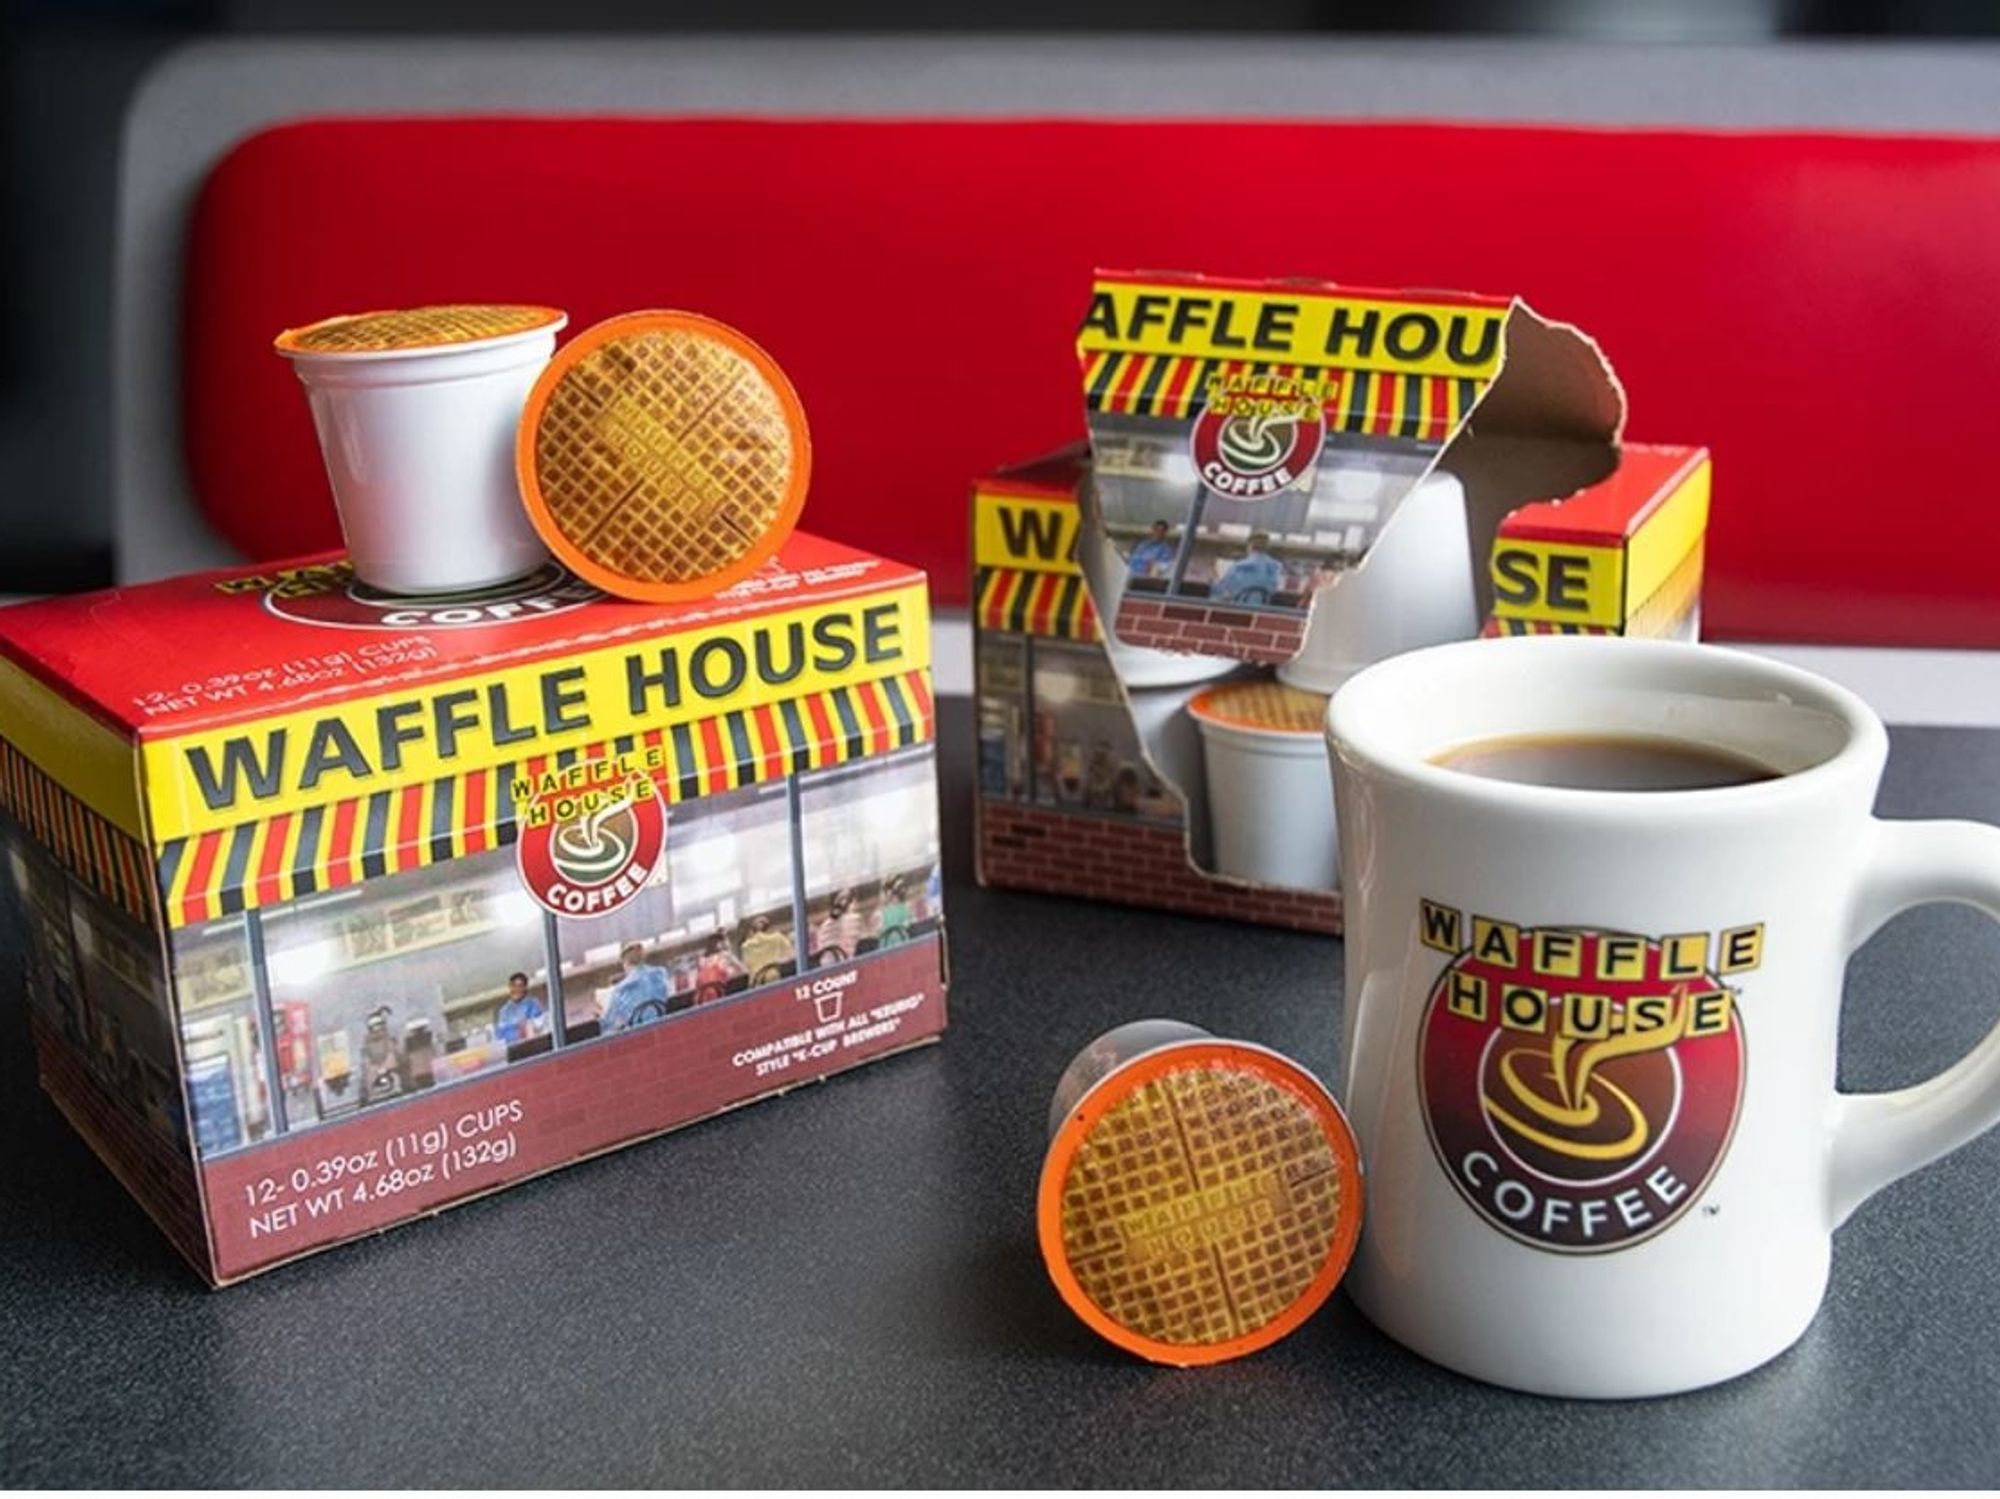 Waffle House coffee shared with a friend is happiness tasted and time well  spent. ☕ Happy #NationalCoffeeDay ☕, By Waffle House